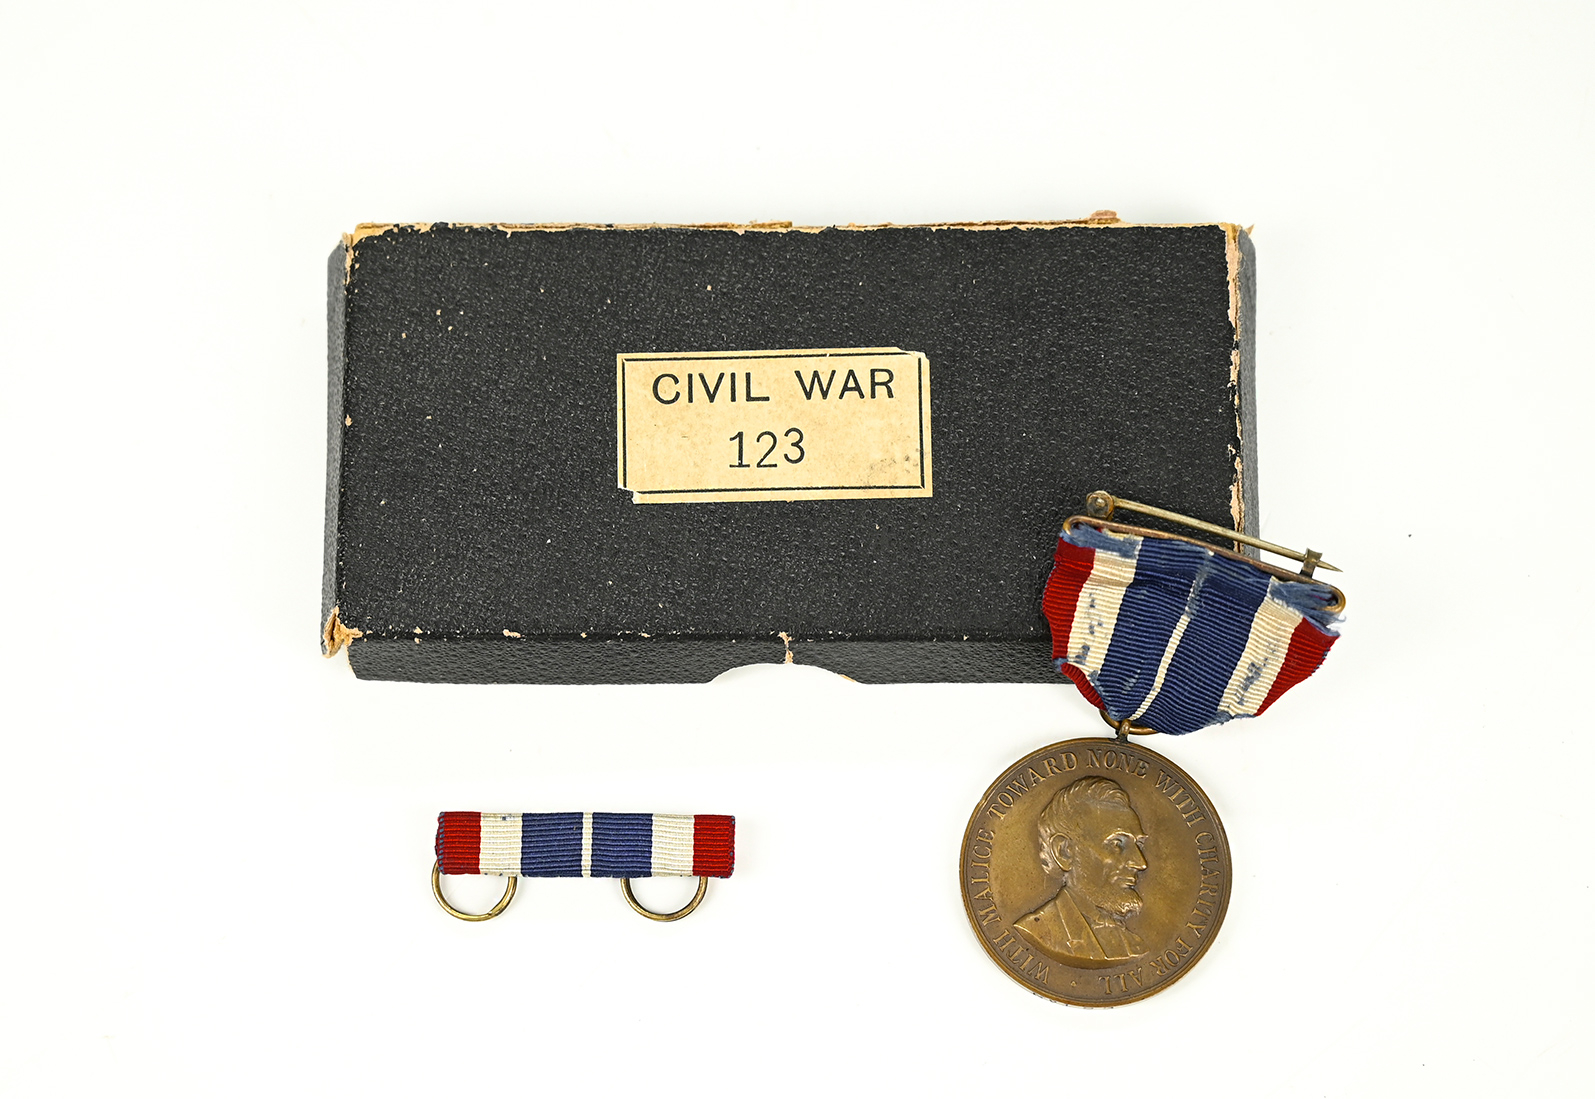 CAPT. JAMES WEBB LONG’S NUMBERED CIVIL WAR ARMY CAMPAIGN MEDAL WITH ORIGINAL PRE-1913 RIBBON AND BAR: 2nd U.S. INFANTRY, THREE WOUNDS, TWO BREVETS!